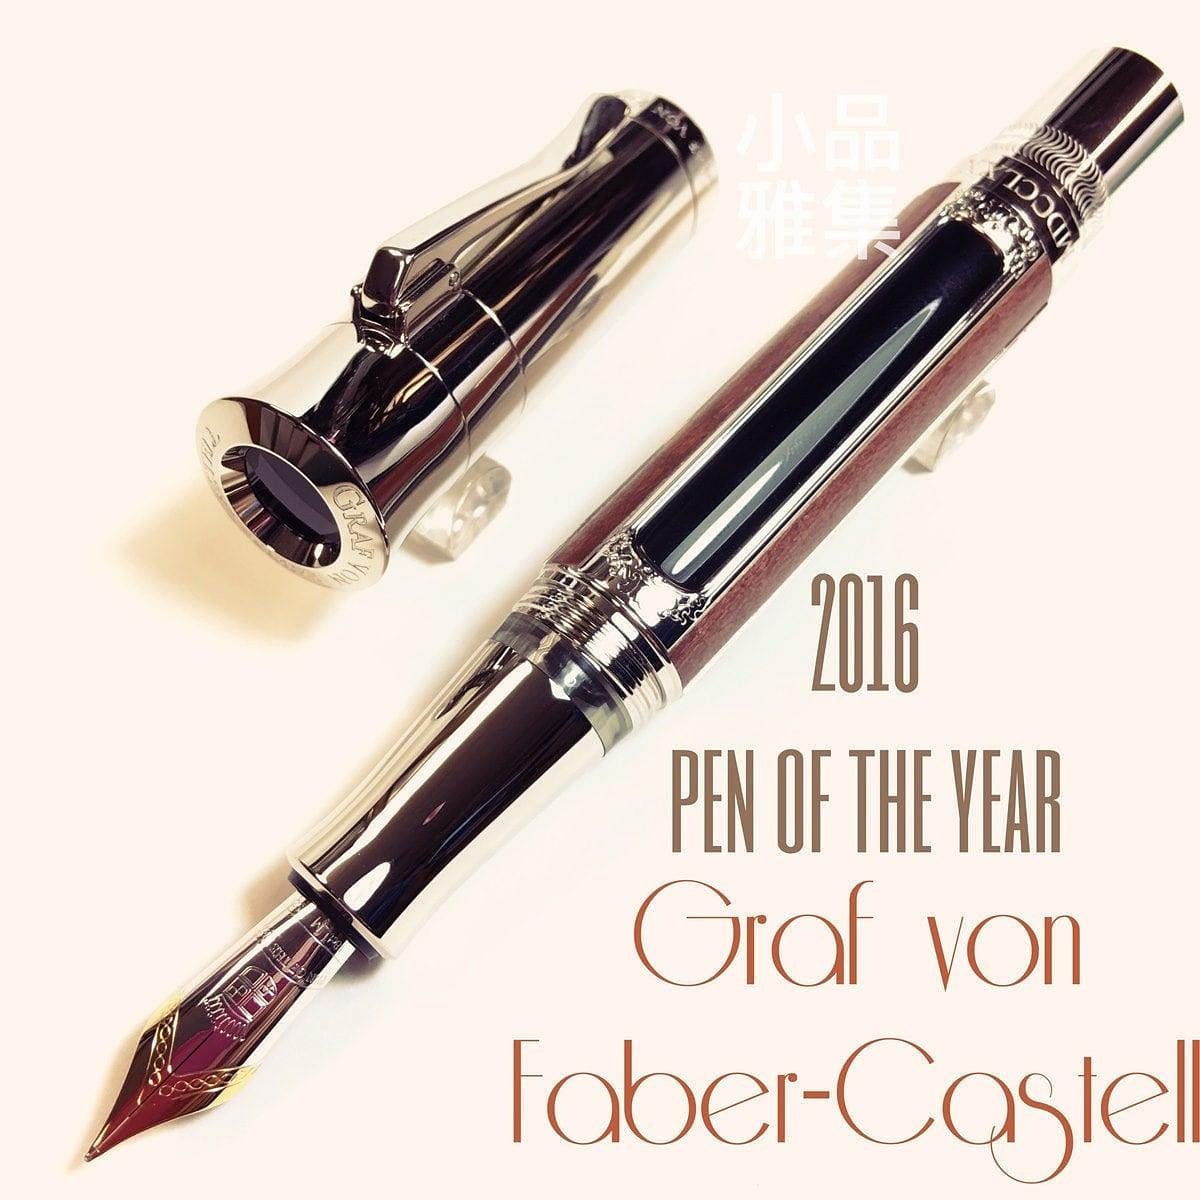 Graf-Von Faber-Castell Fountain pen Pen of the Year 2016 - TY Lee